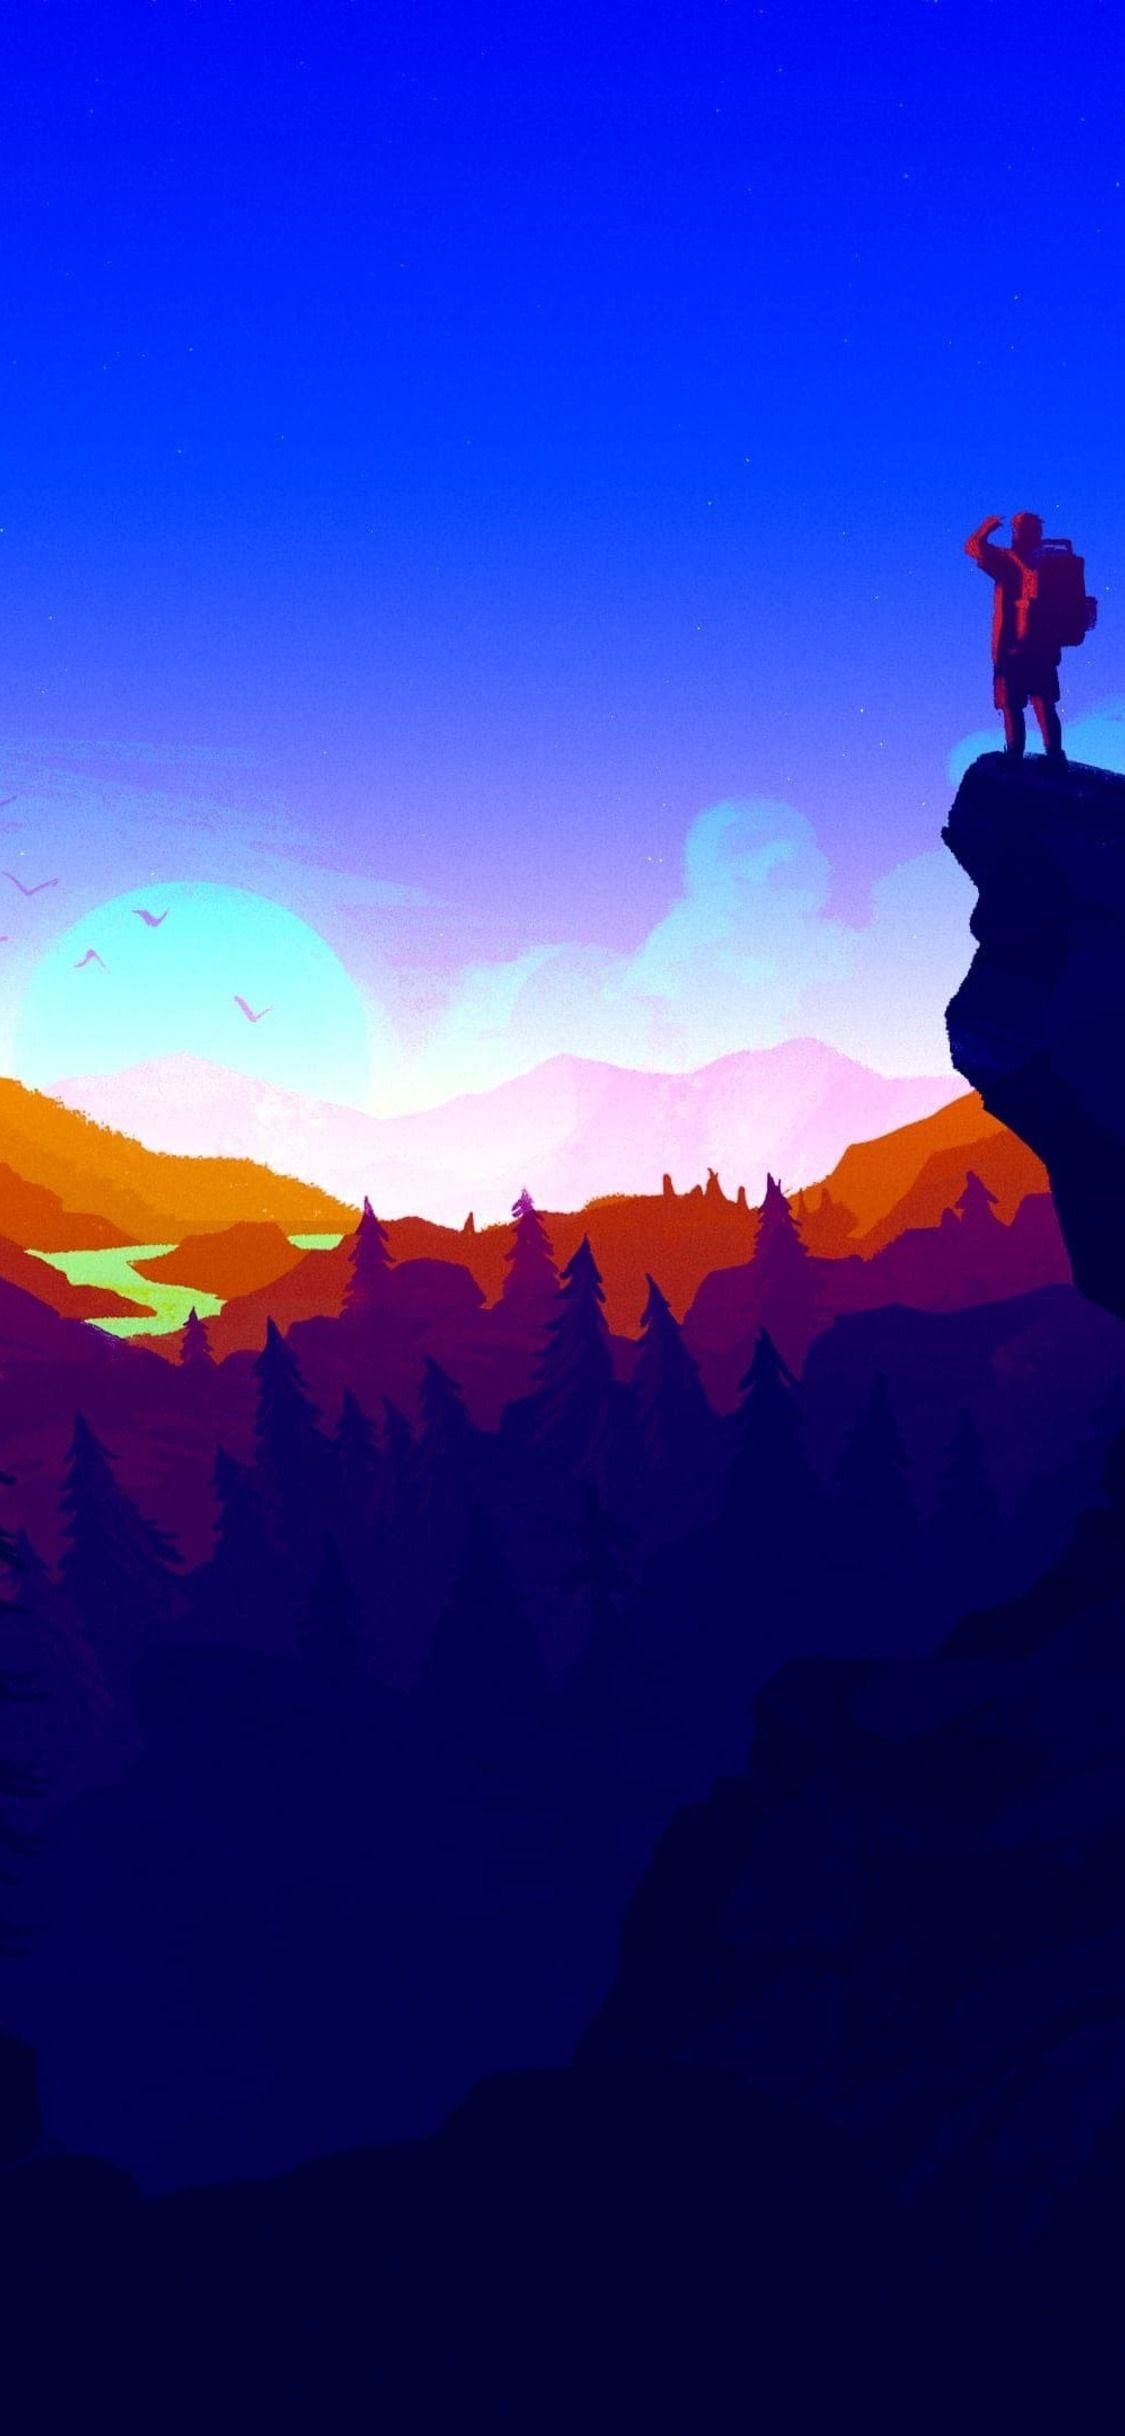 Firewatch 4k Iphone X,iphone 10 Hd 4k Wallpapers, Image